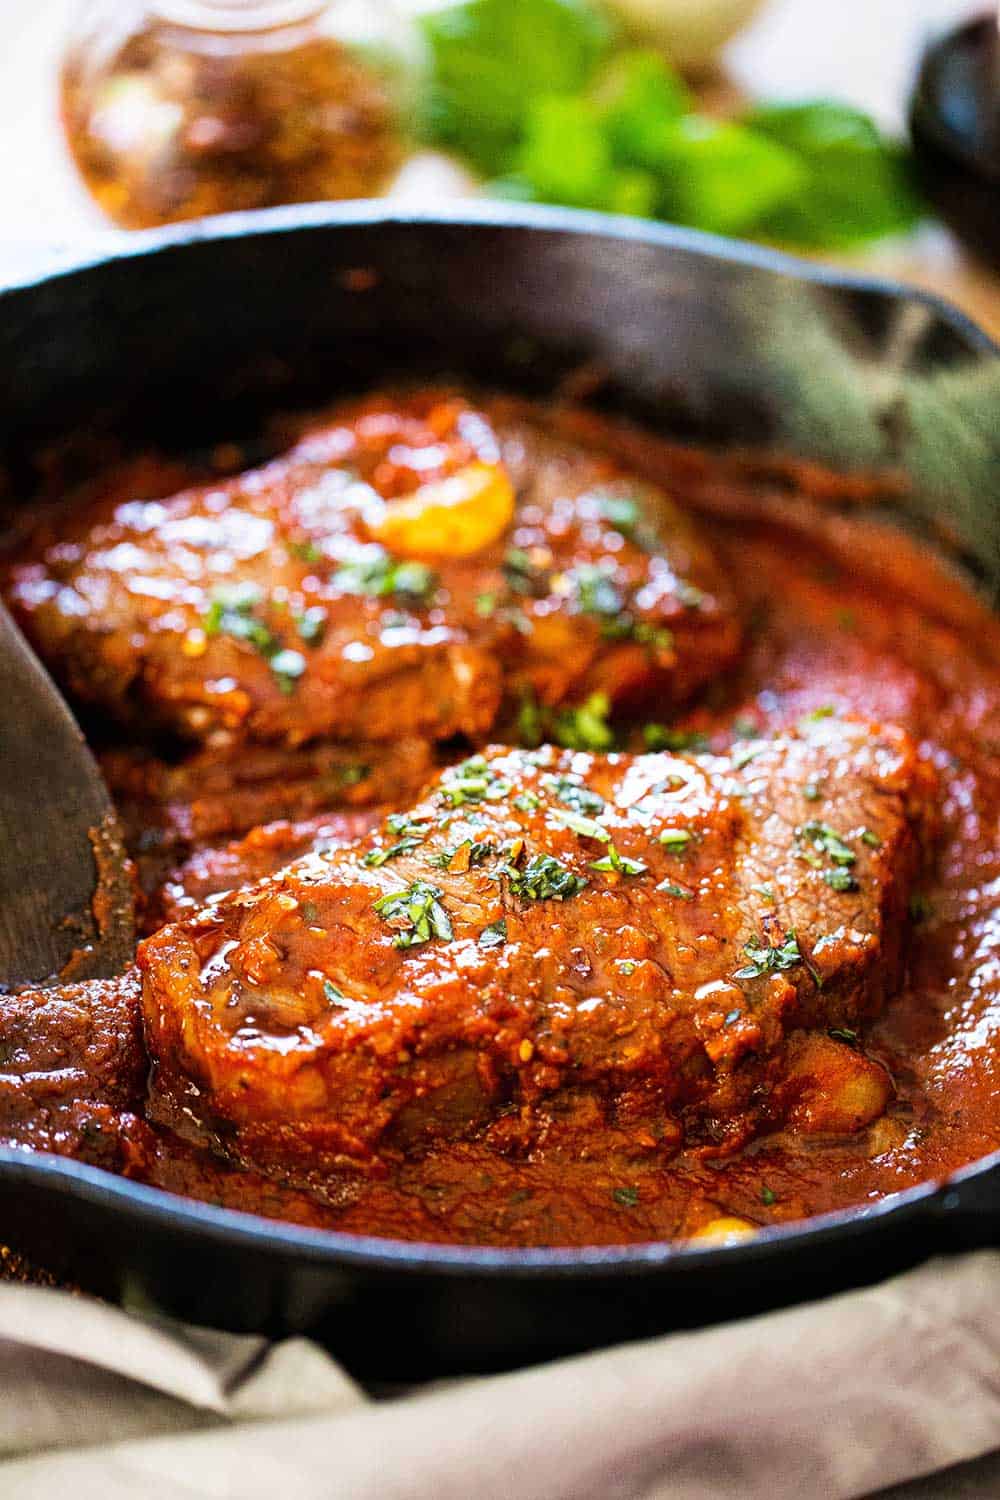 A cast-iron skillet filled with to seared steaks covered in a tomato sauce for steak pizzaiola.